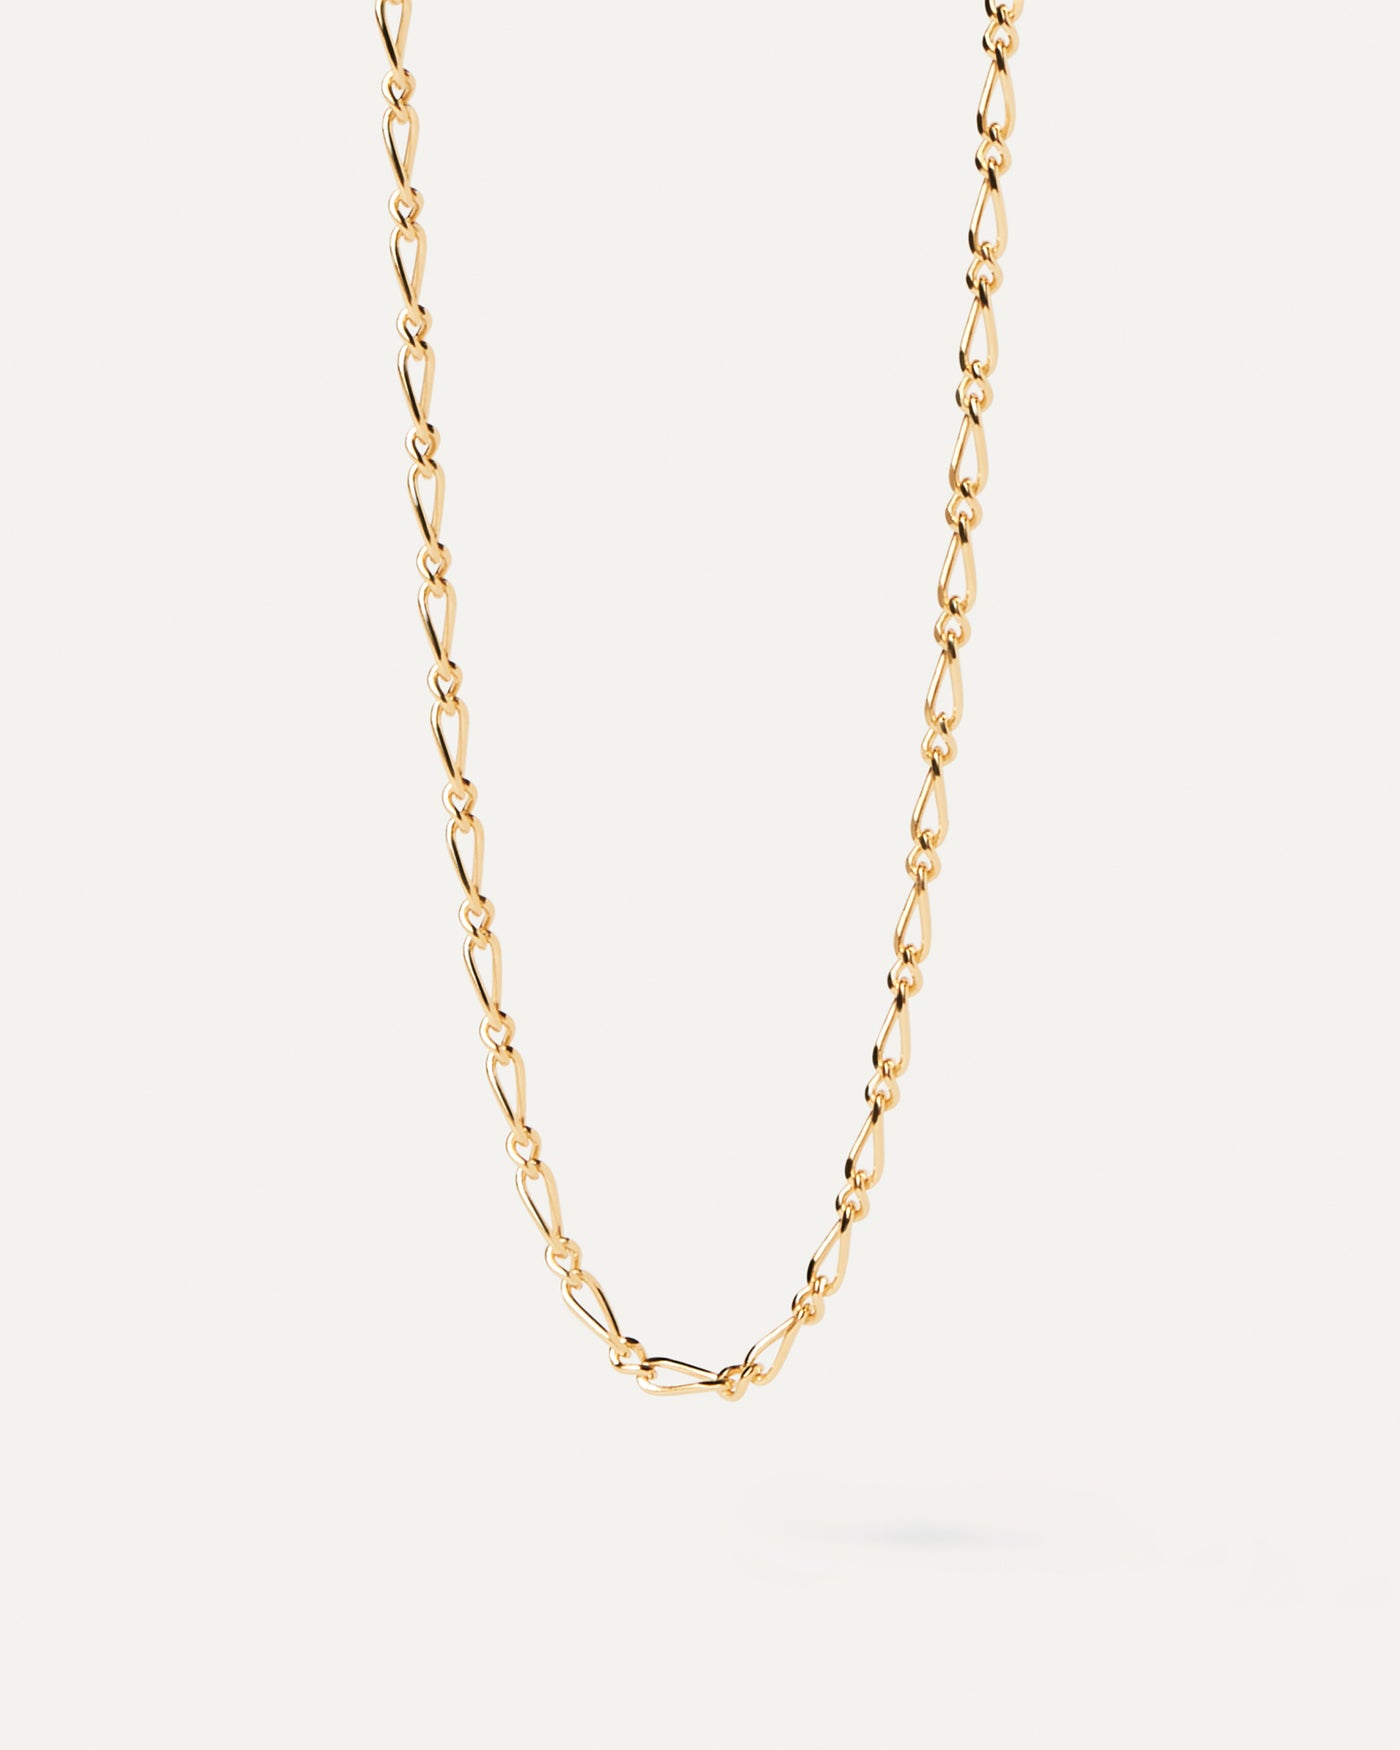 2023 Selection | Adele Chain Necklace. Gold-plated sleek chain necklace with intertwined asymmetric links. Get the latest arrival from PDPAOLA. Place your order safely and get this Best Seller. Free Shipping.